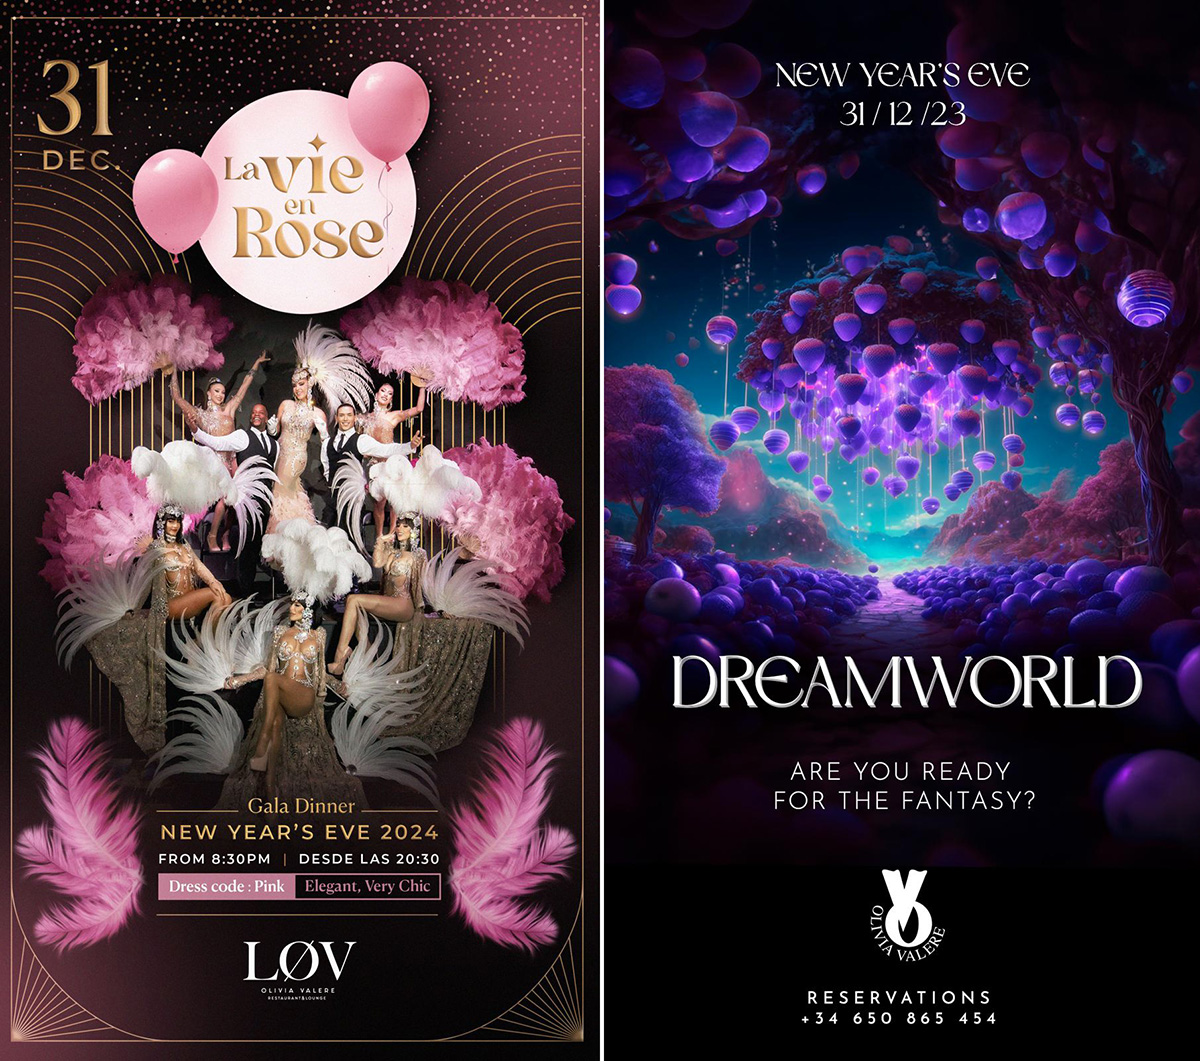 Posters for New Years eve Gala dinner and Dreamworls disco at Olivia Valere,